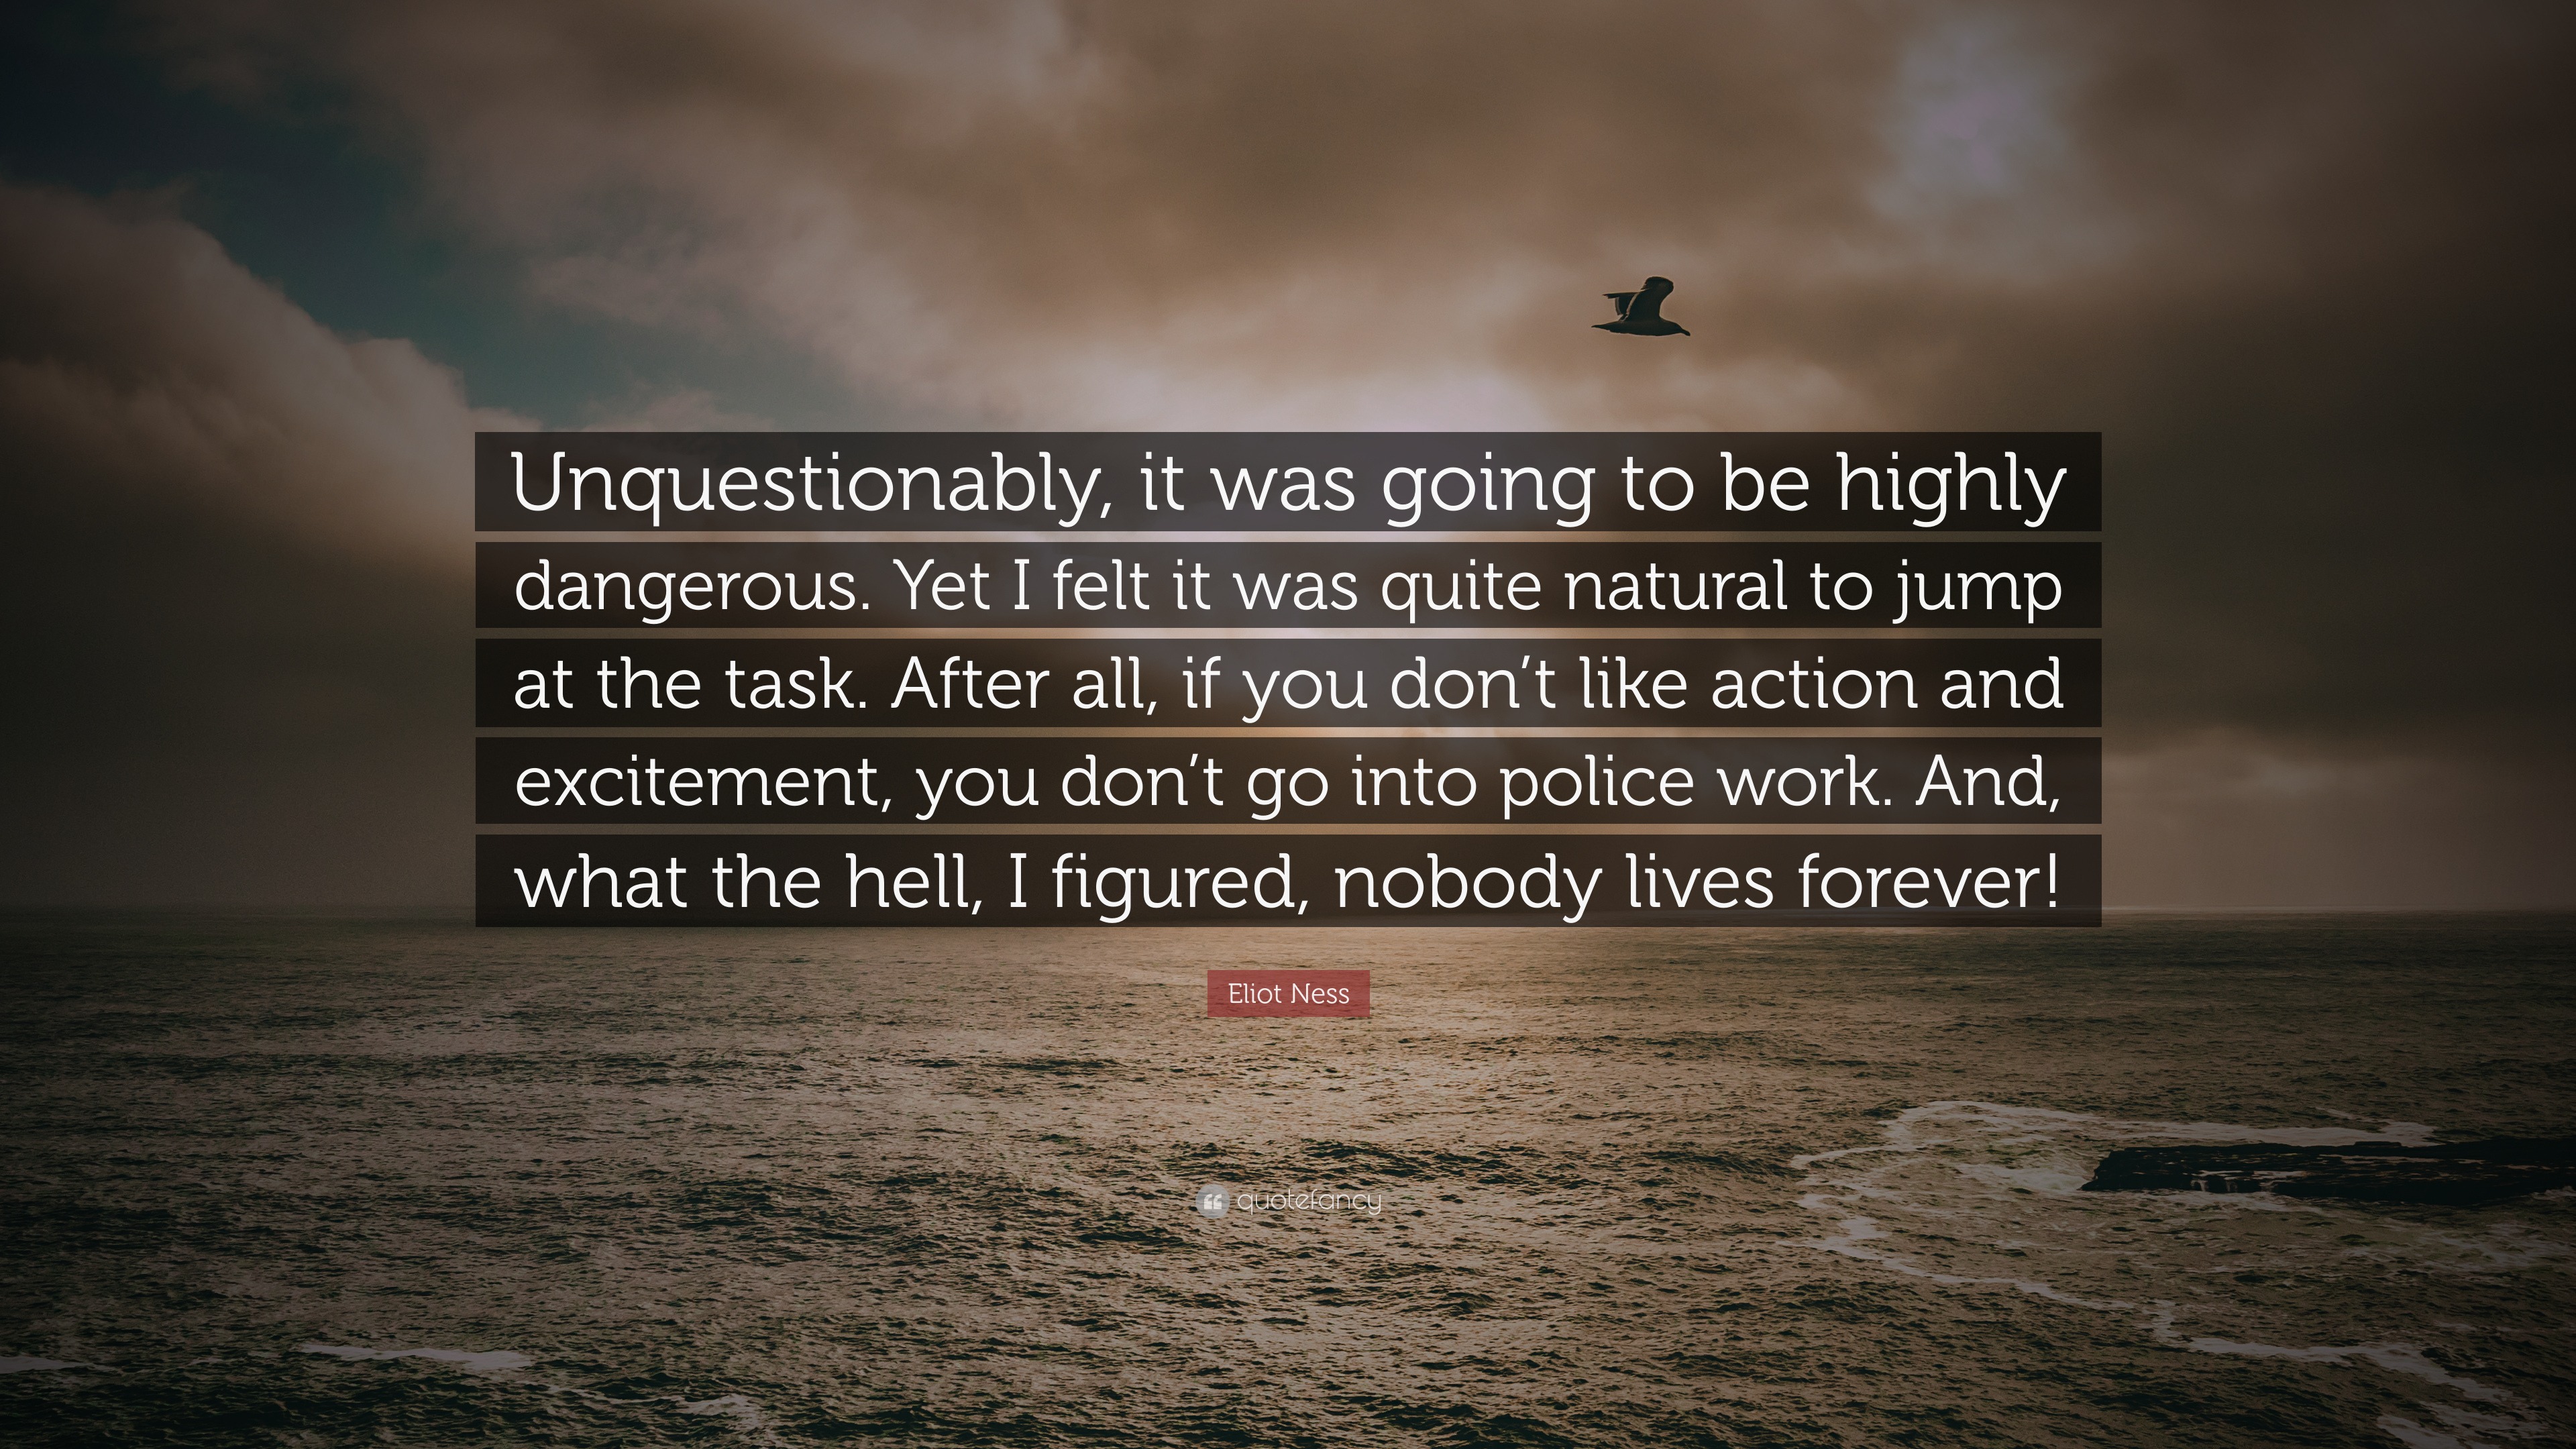 Eliot Ness Quote: “Unquestionably, it was going to be highly dangerous. Yet  I felt it was quite natural to jump at the task. After all, if ”